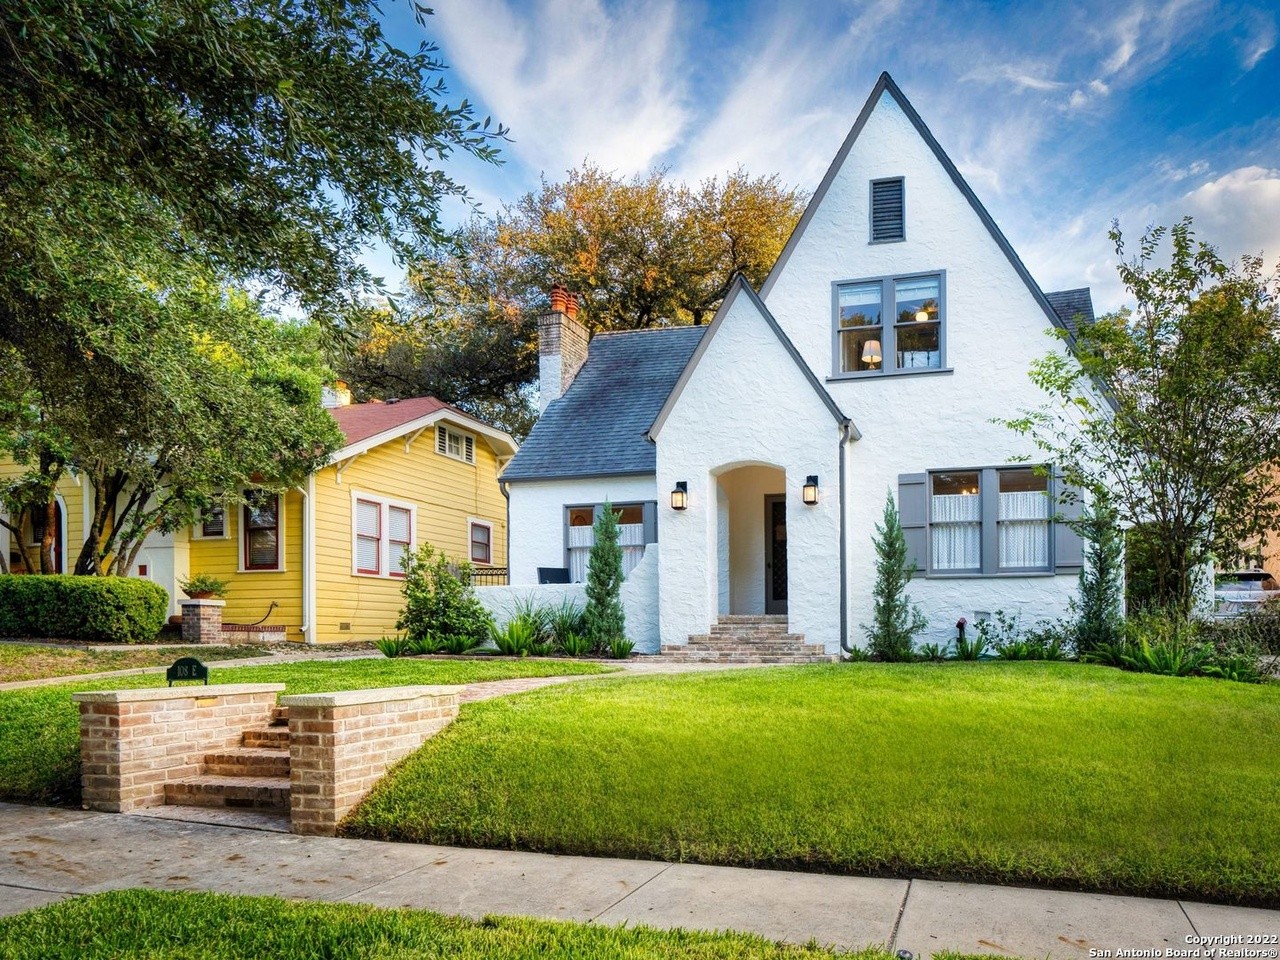 A 1929 San Antonio home owned by the son of Civil War hero and Texas banker Ira Evans is for sale